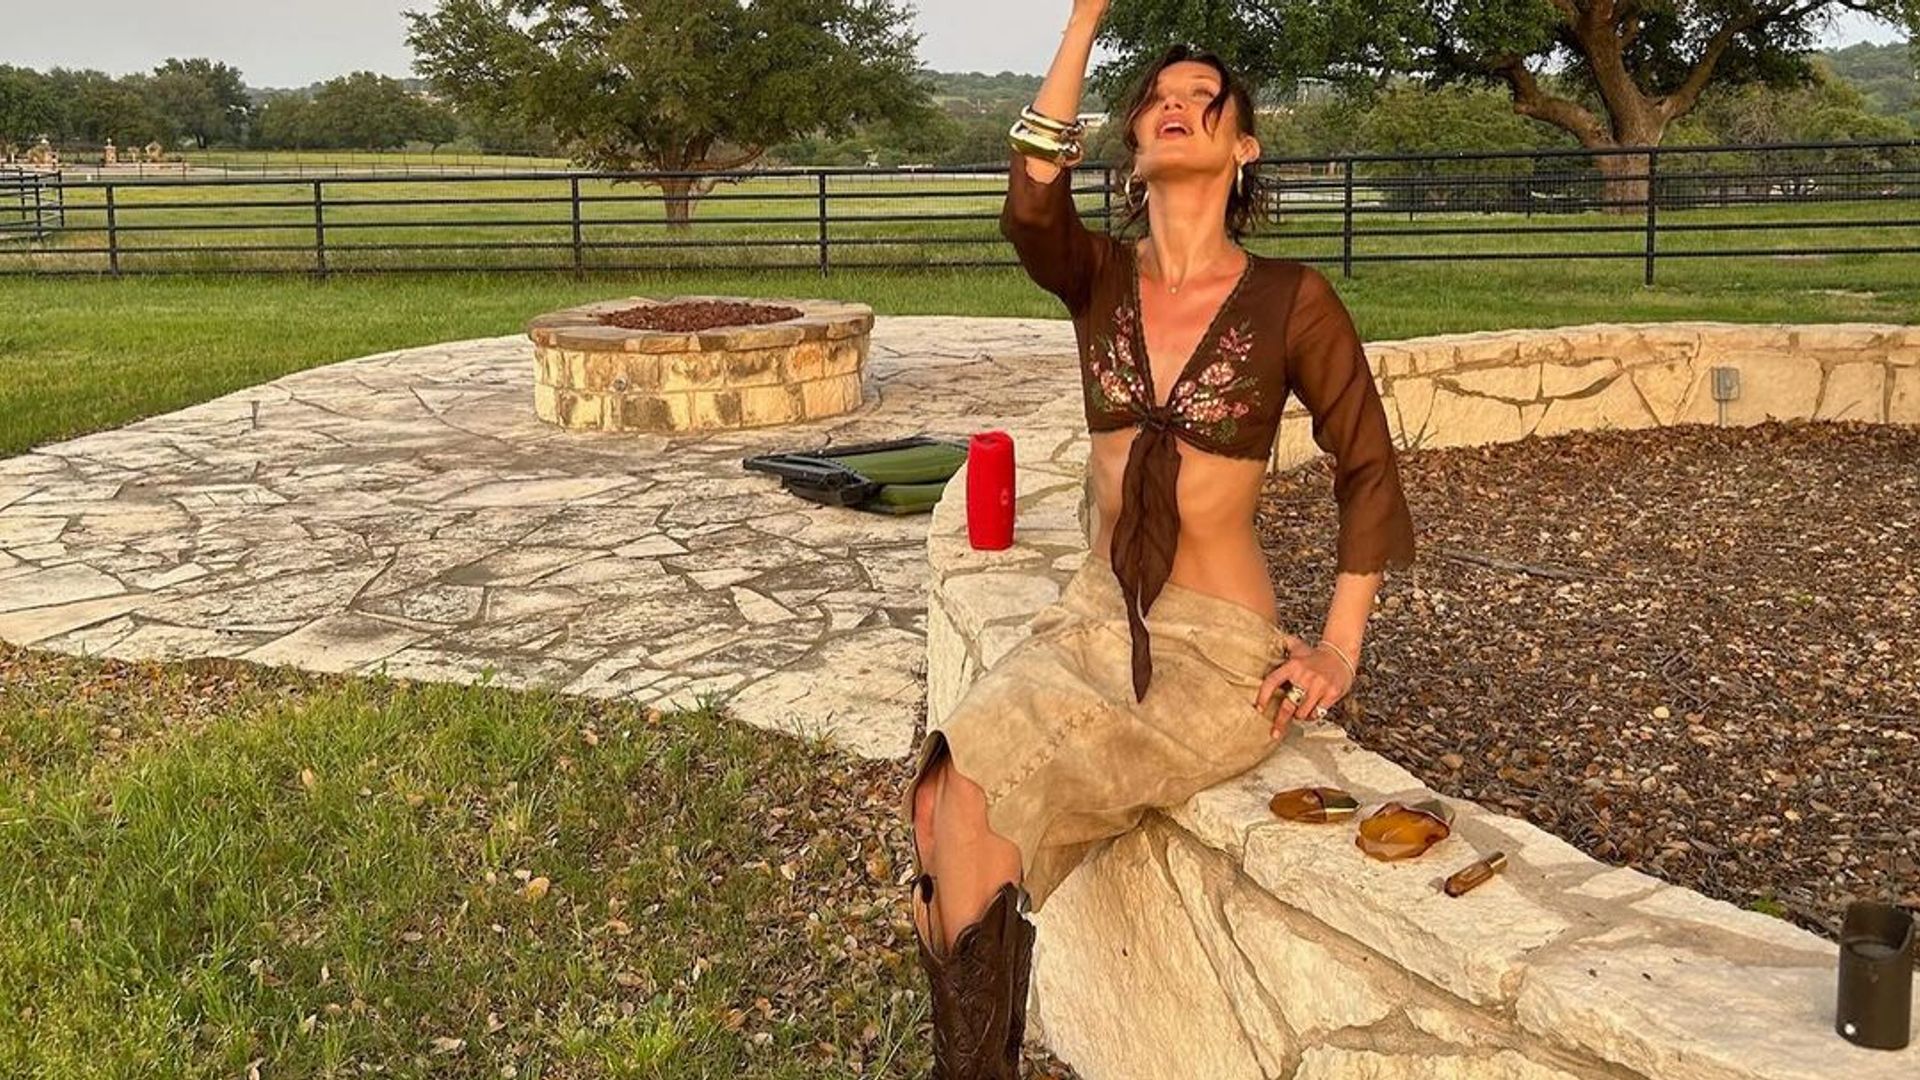 5 things you need to get Bella Hadid's coastal cowgirl style